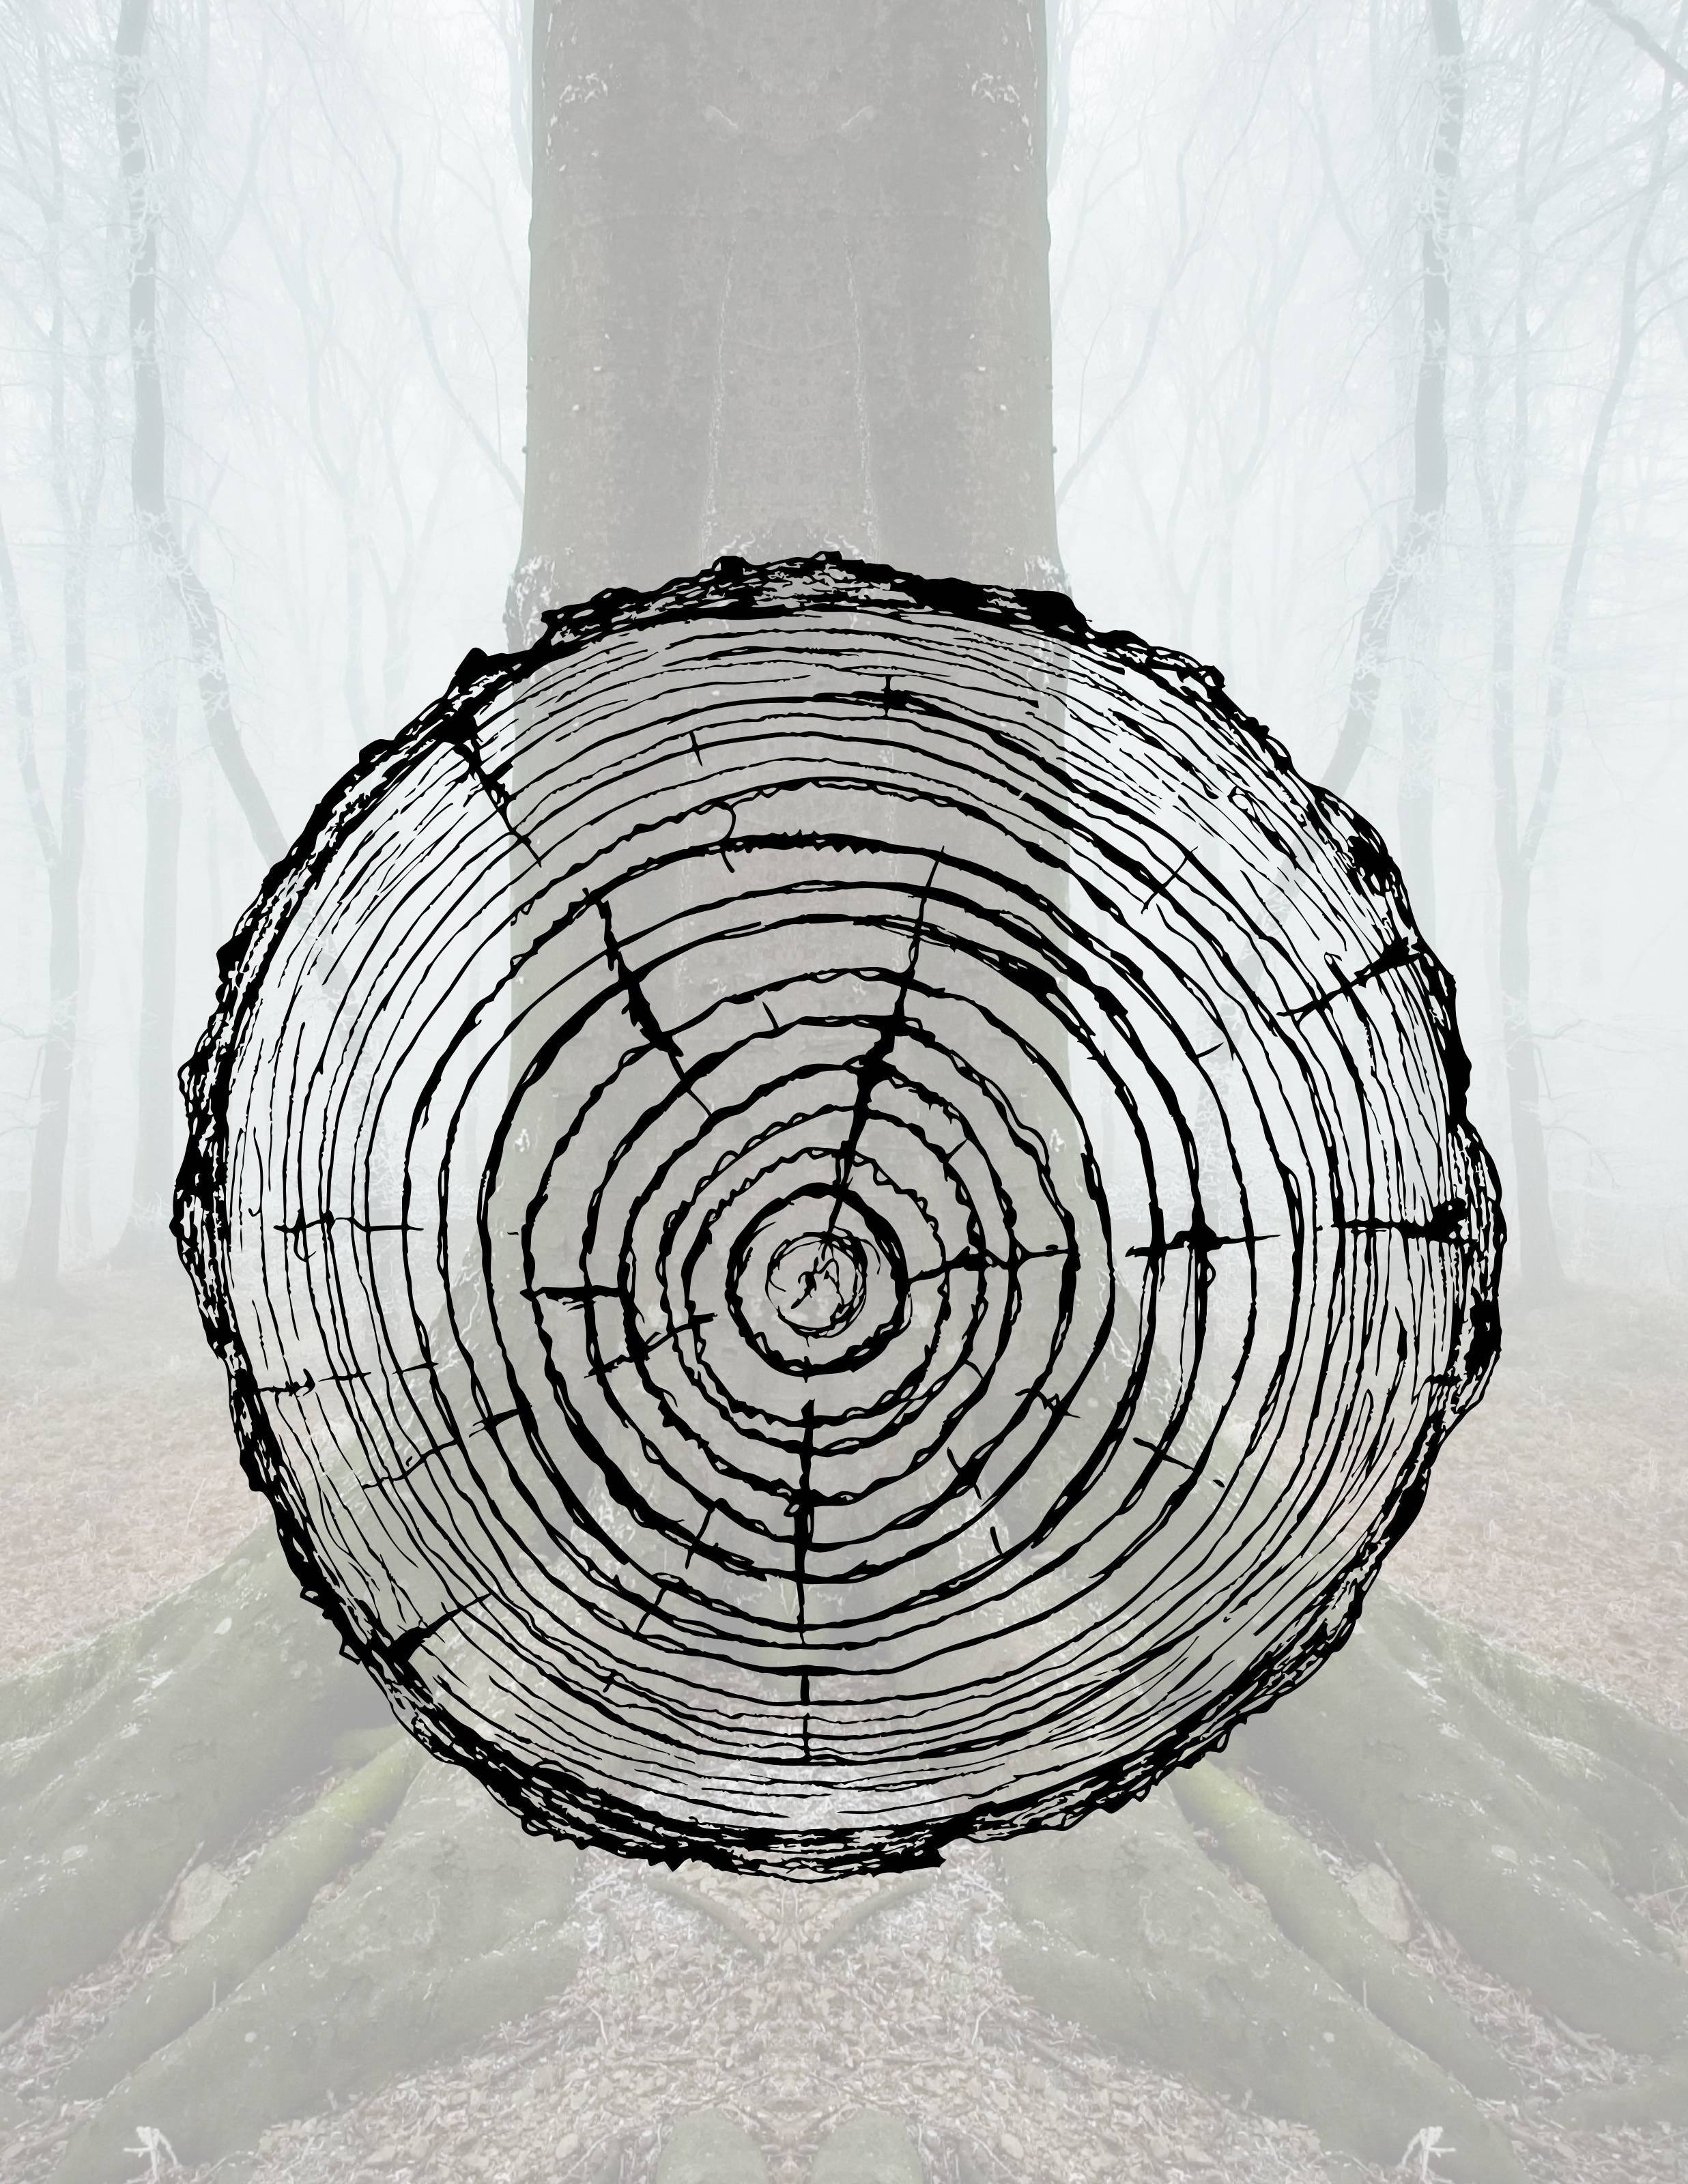 Tree ring cross section. Shown are the annual growth rings, or annual rings, seen at the end of a tree stump or log, representing one year of a tree's life.